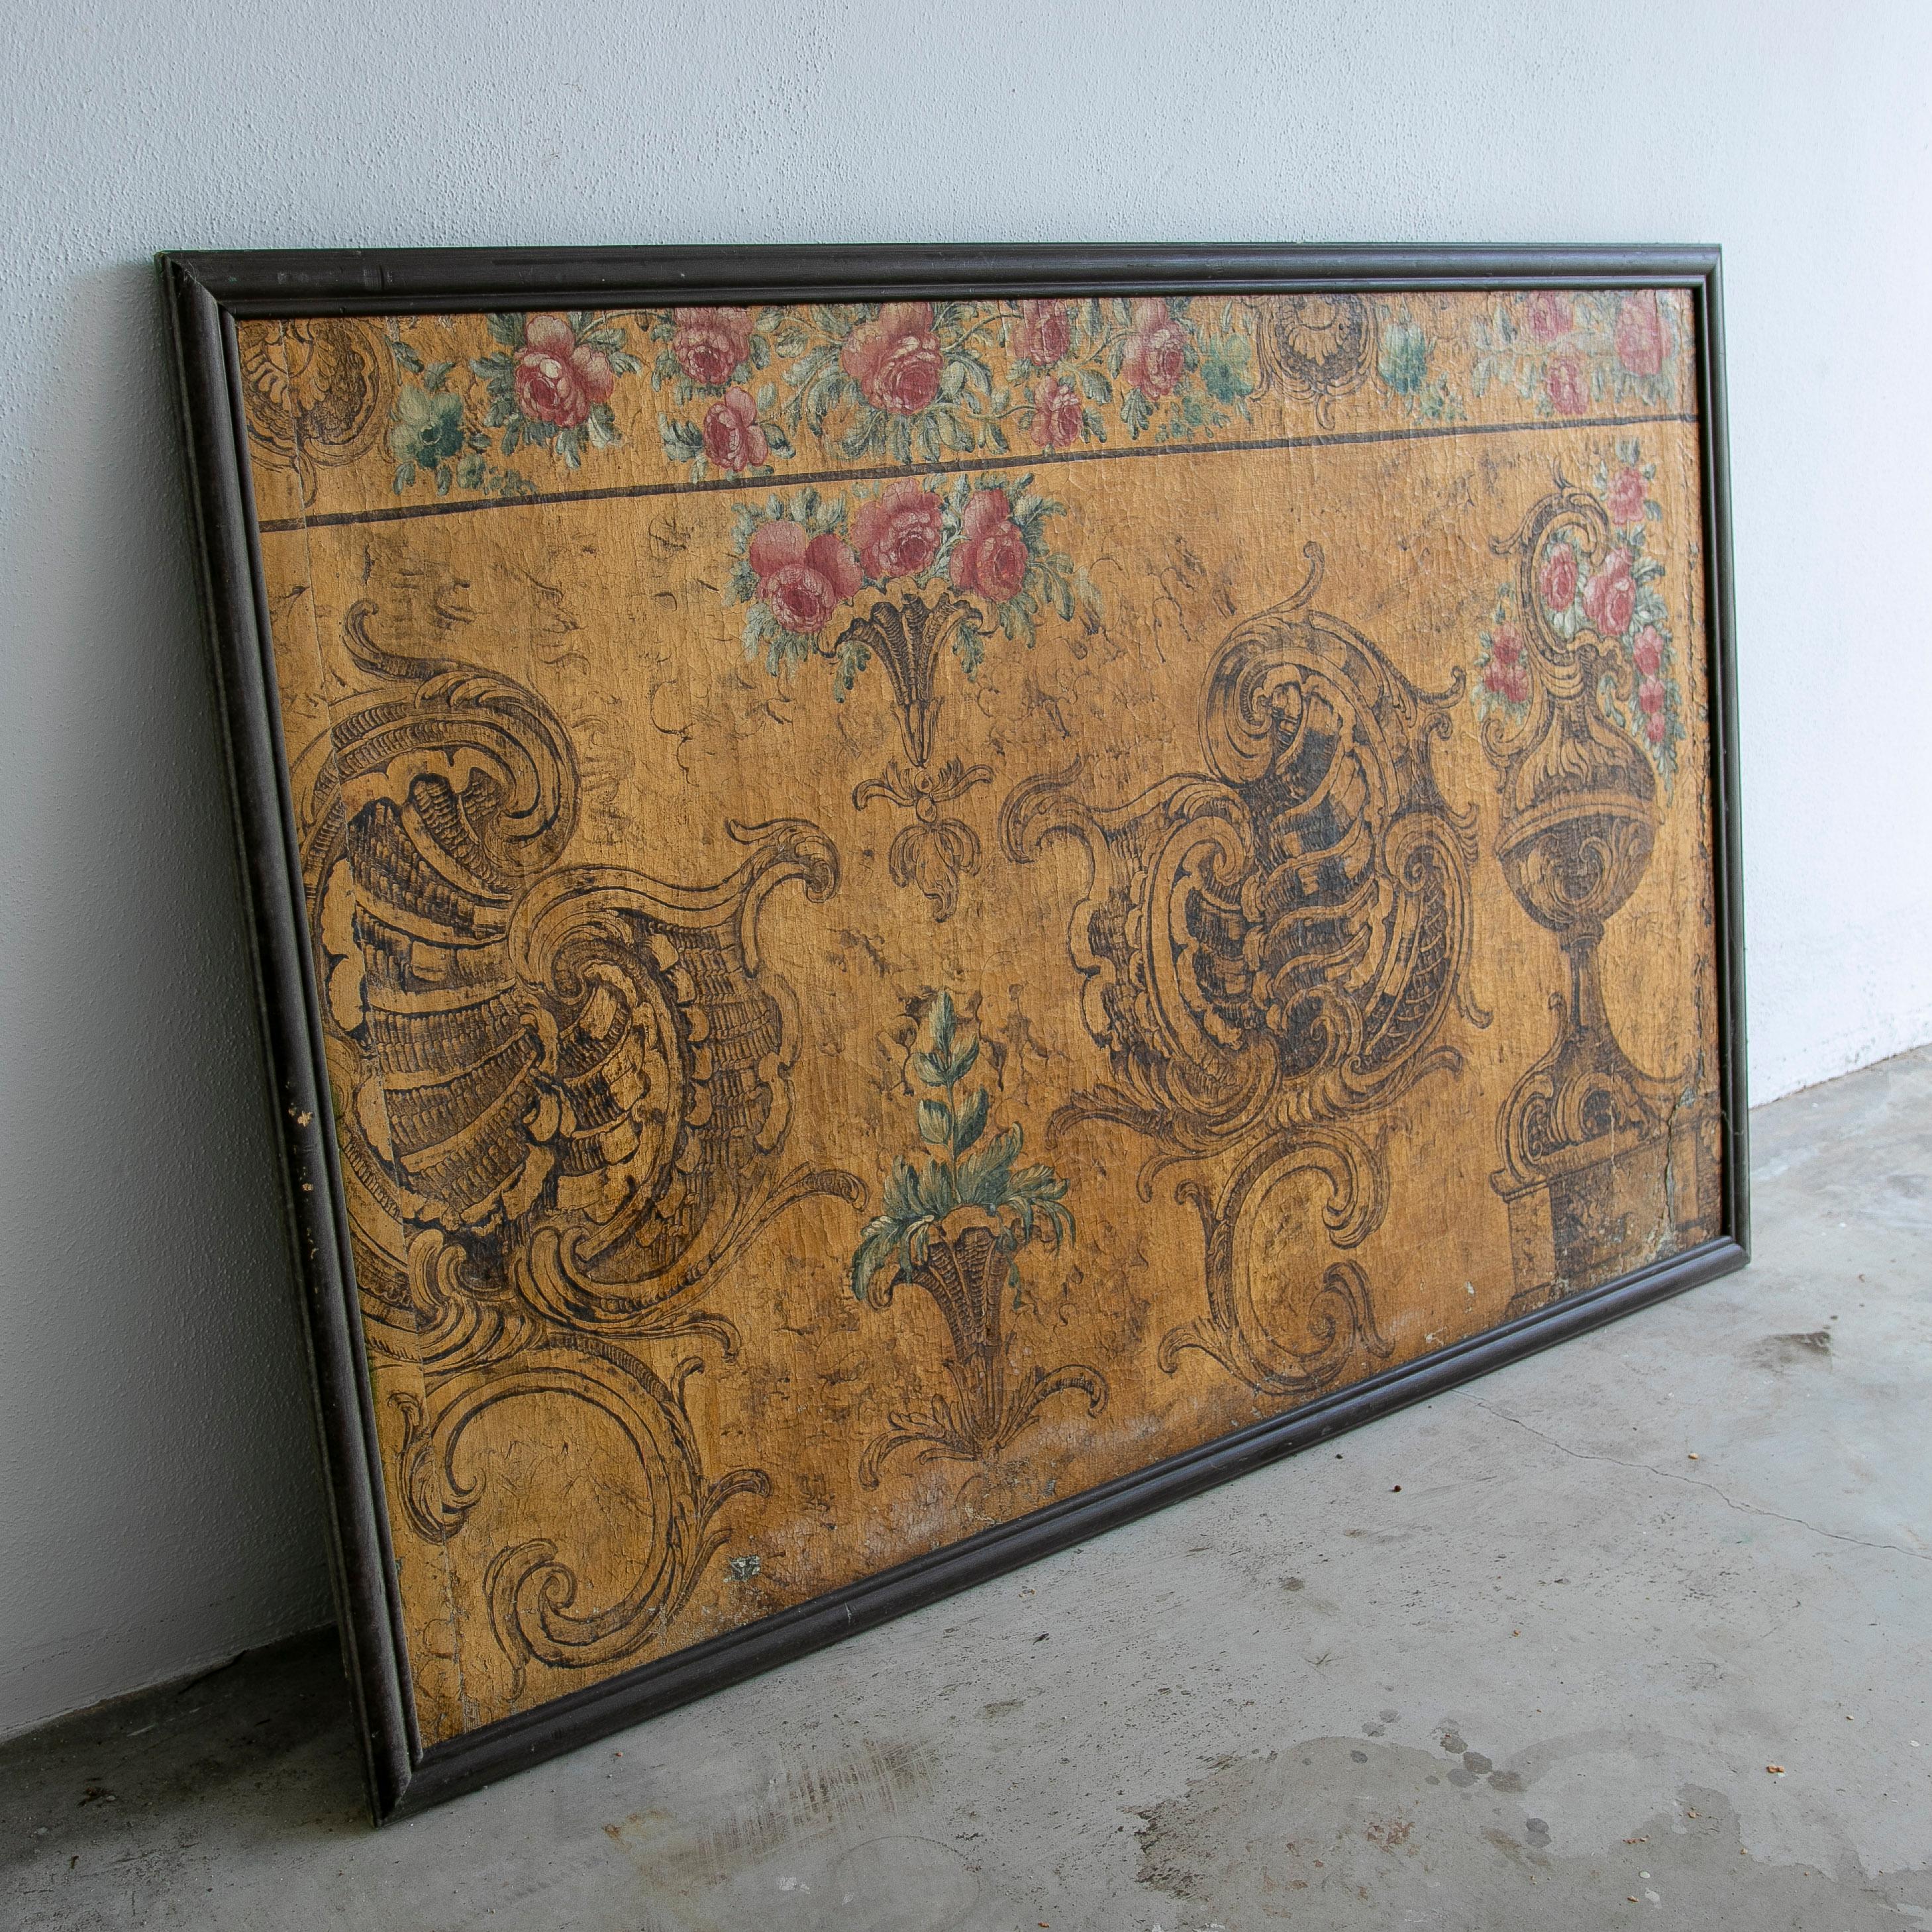 Antique mid 18th century Italian late Baroque / Rococo oil on cloth framed ornamental painting with rocaille, flowering roses and vases.